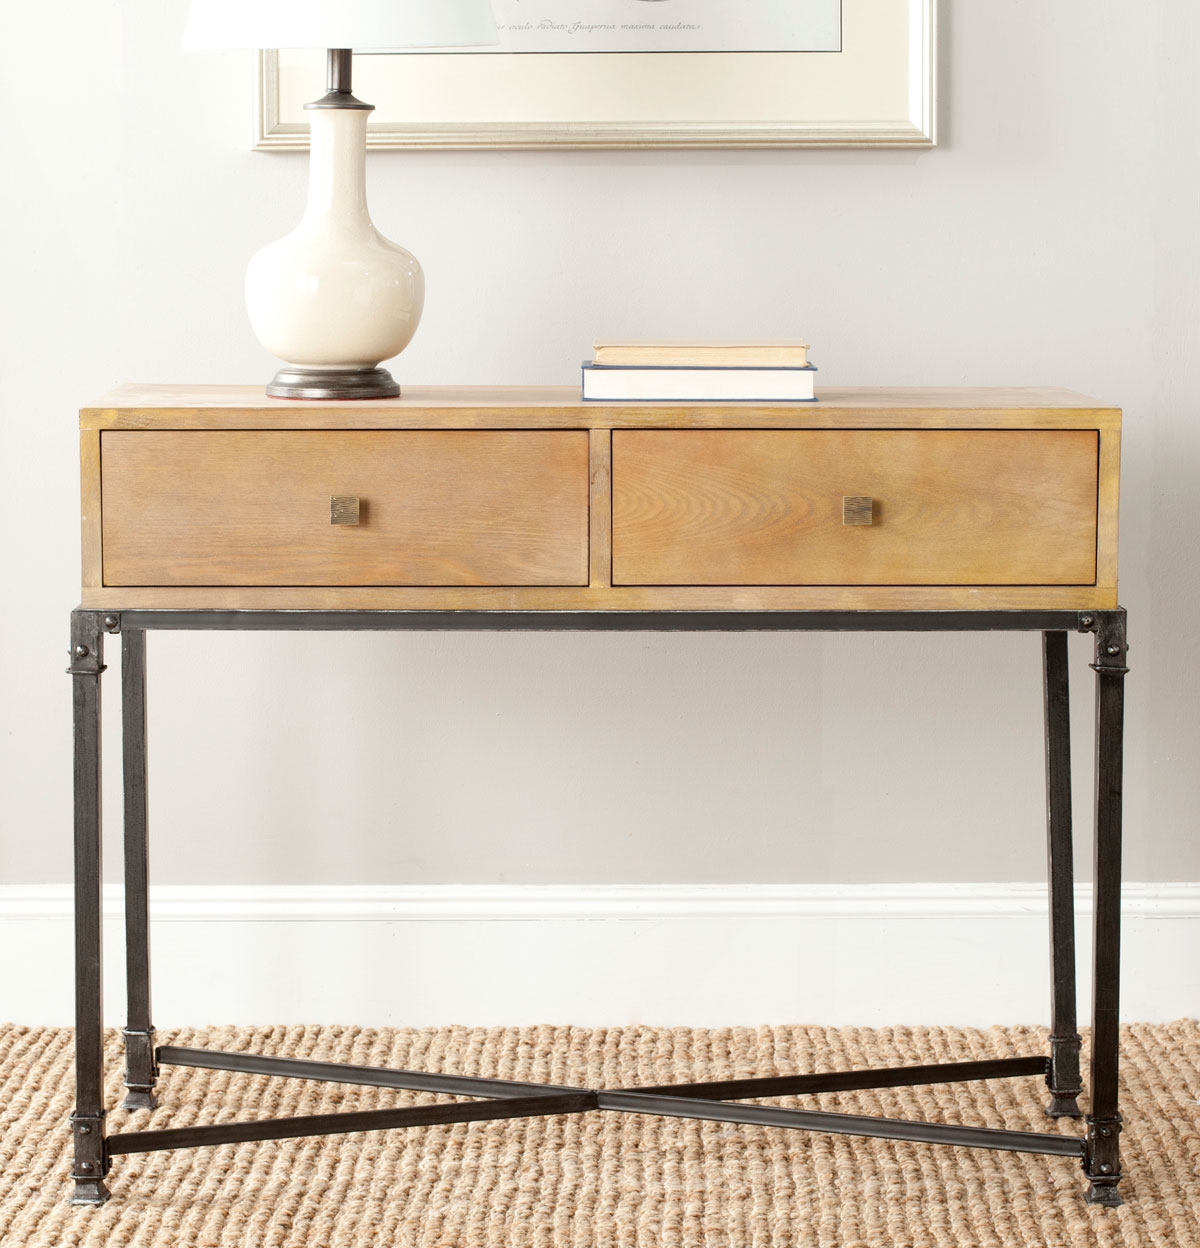 Julian 2 Drawer Console - Natural - Arlo Home - Image 2